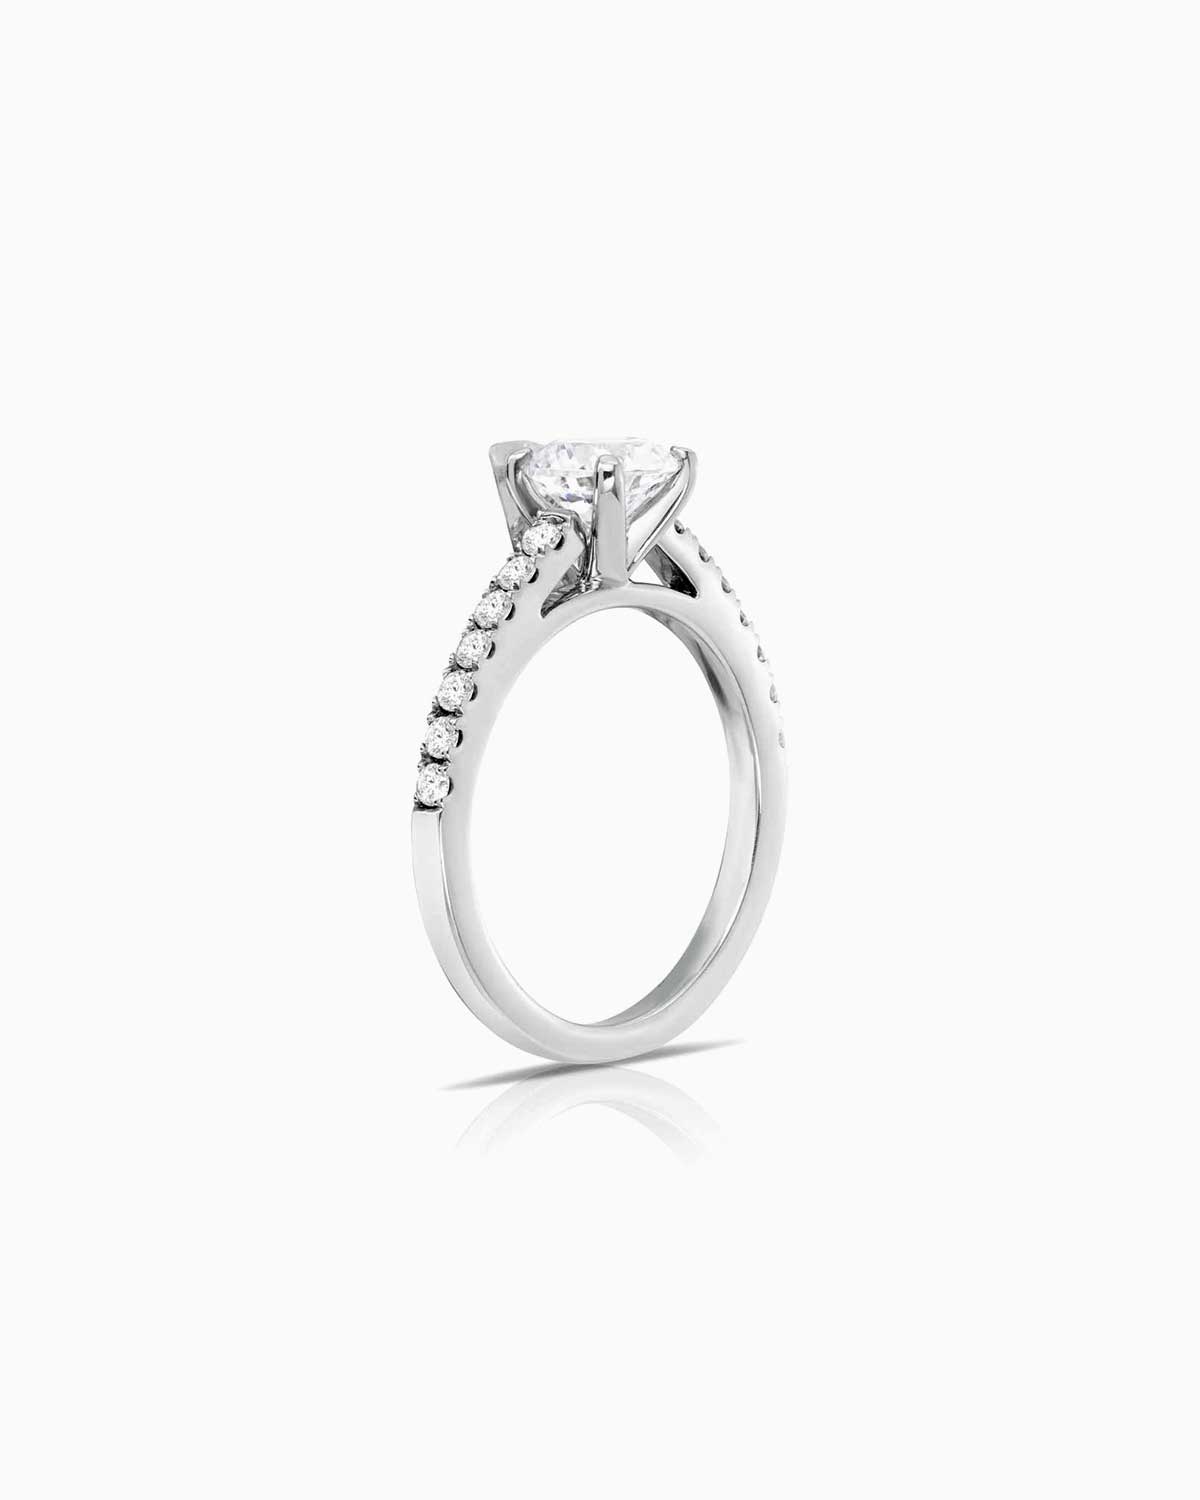 4 claw round diamond engagement ring with shoulder diamonds and set in 18 karat white gold by claude and me jewellery.